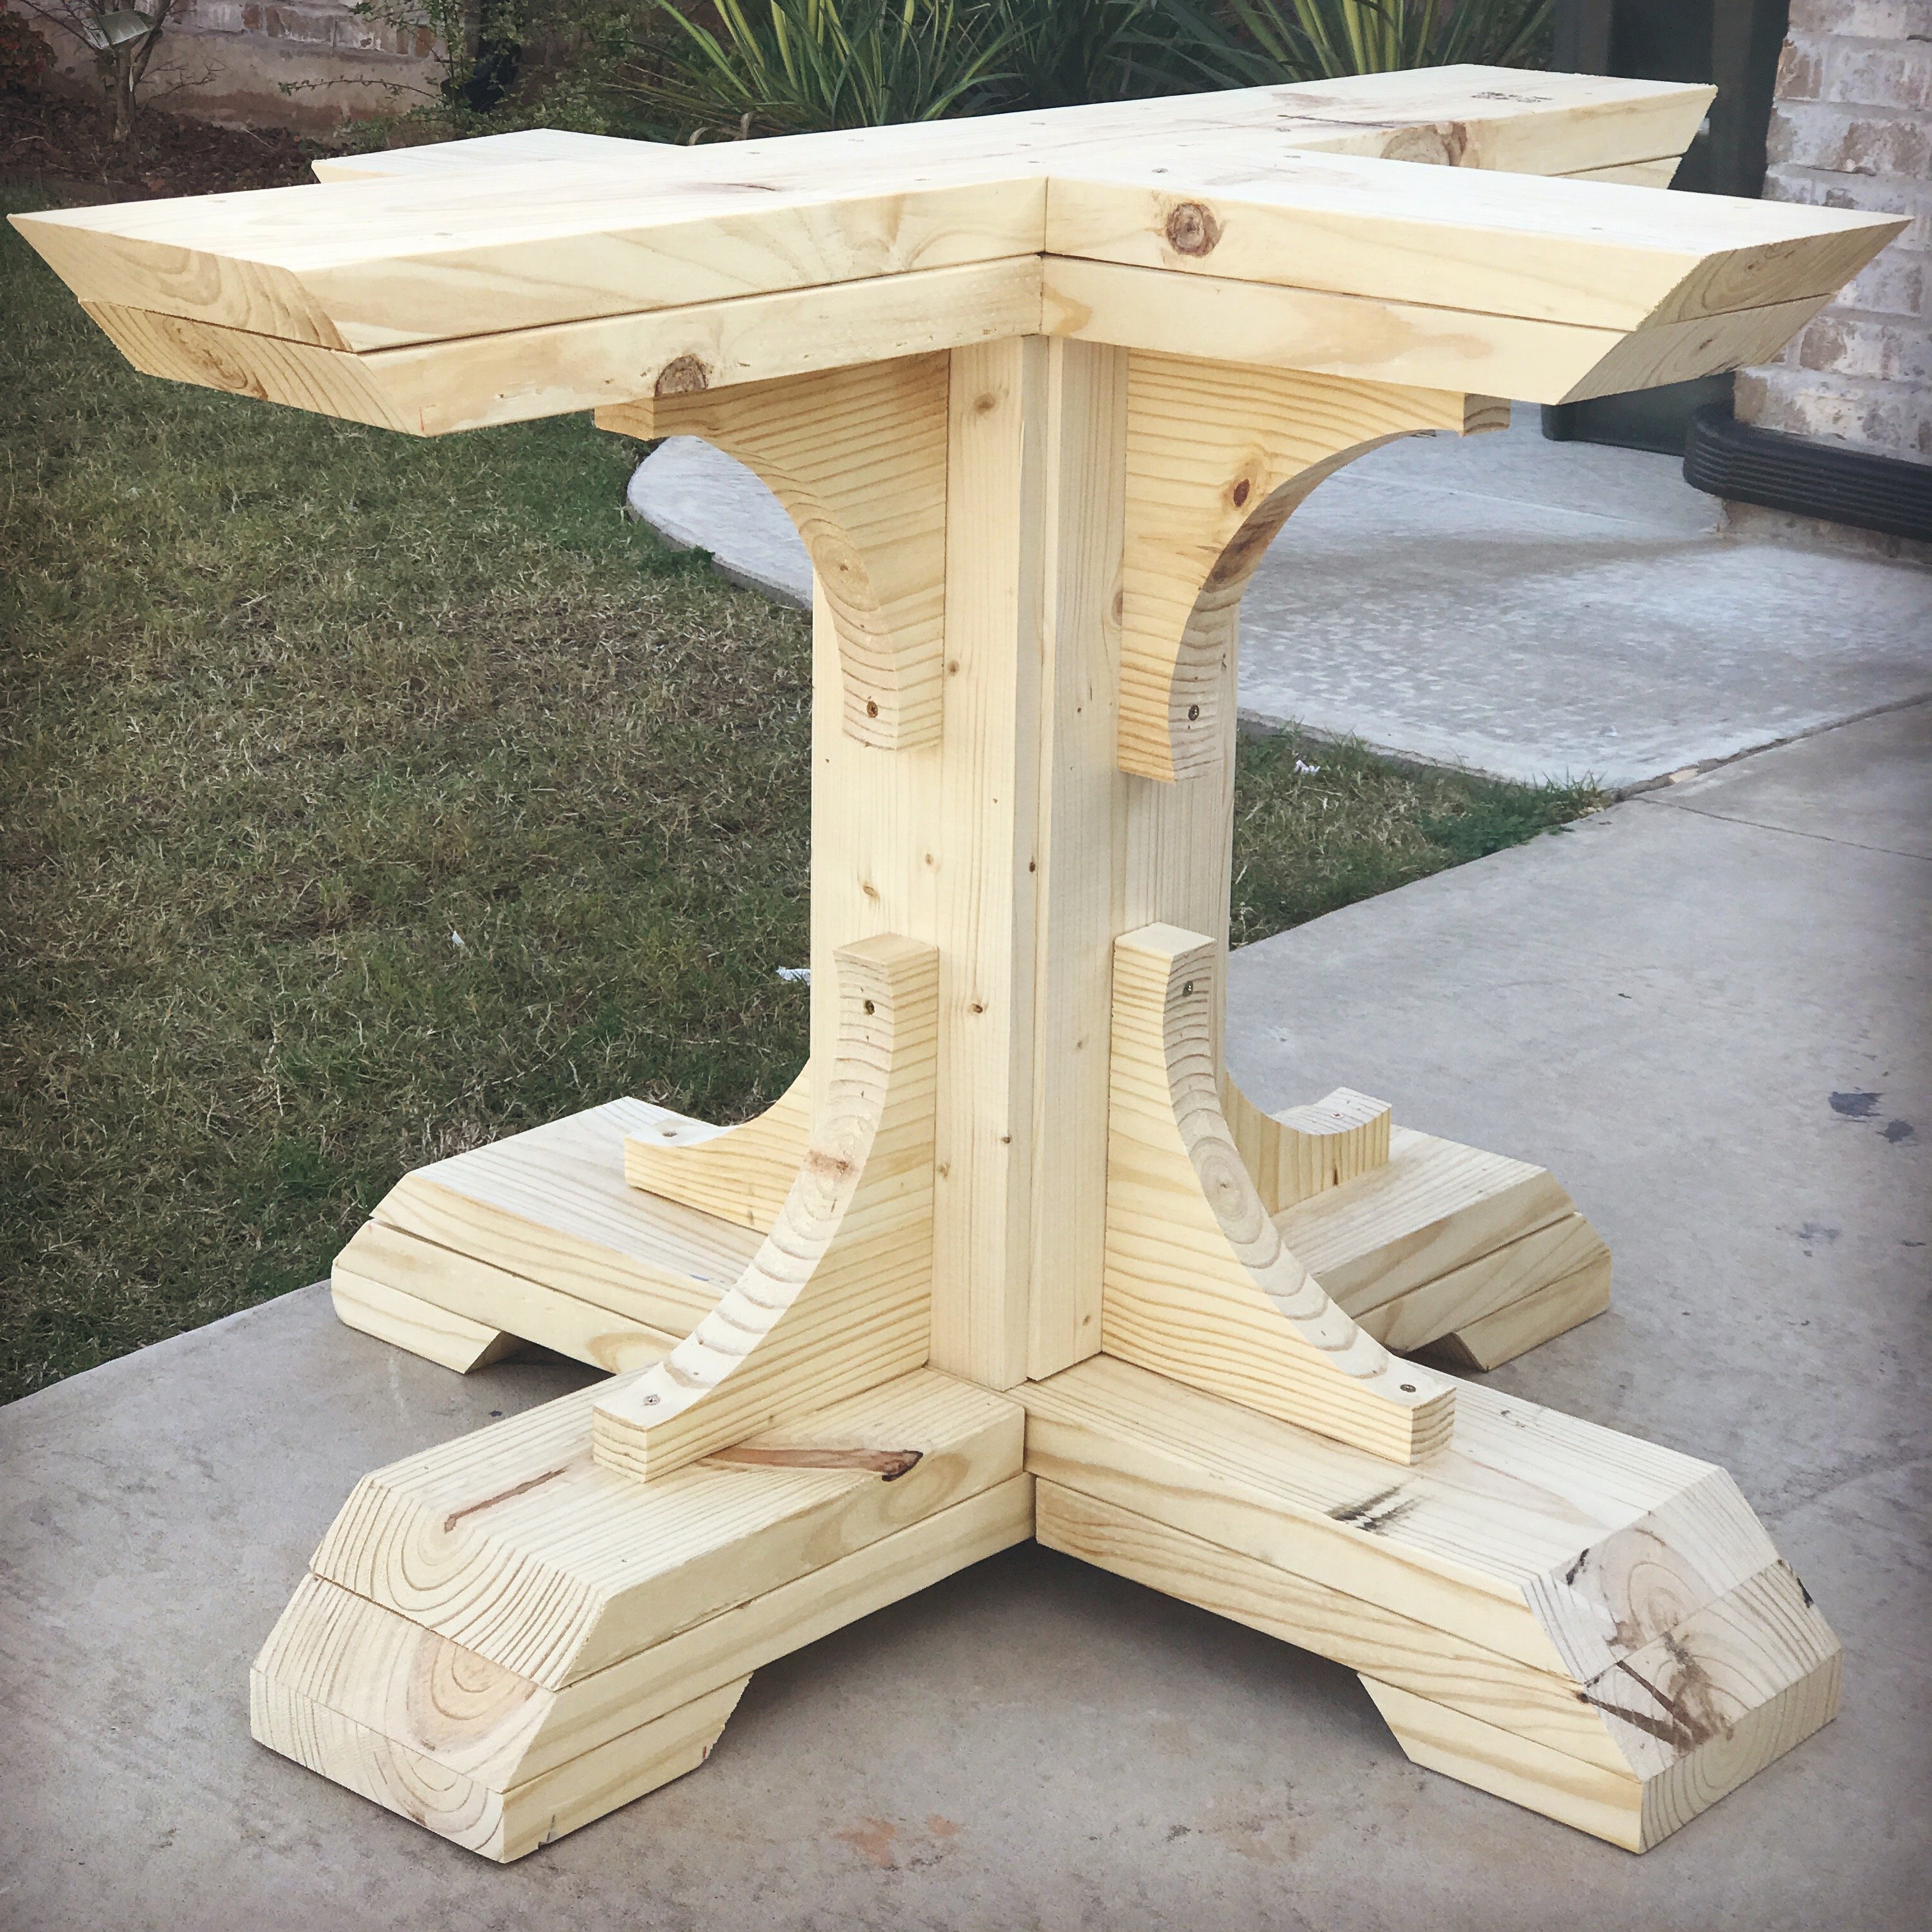 Woodworking table pedestal